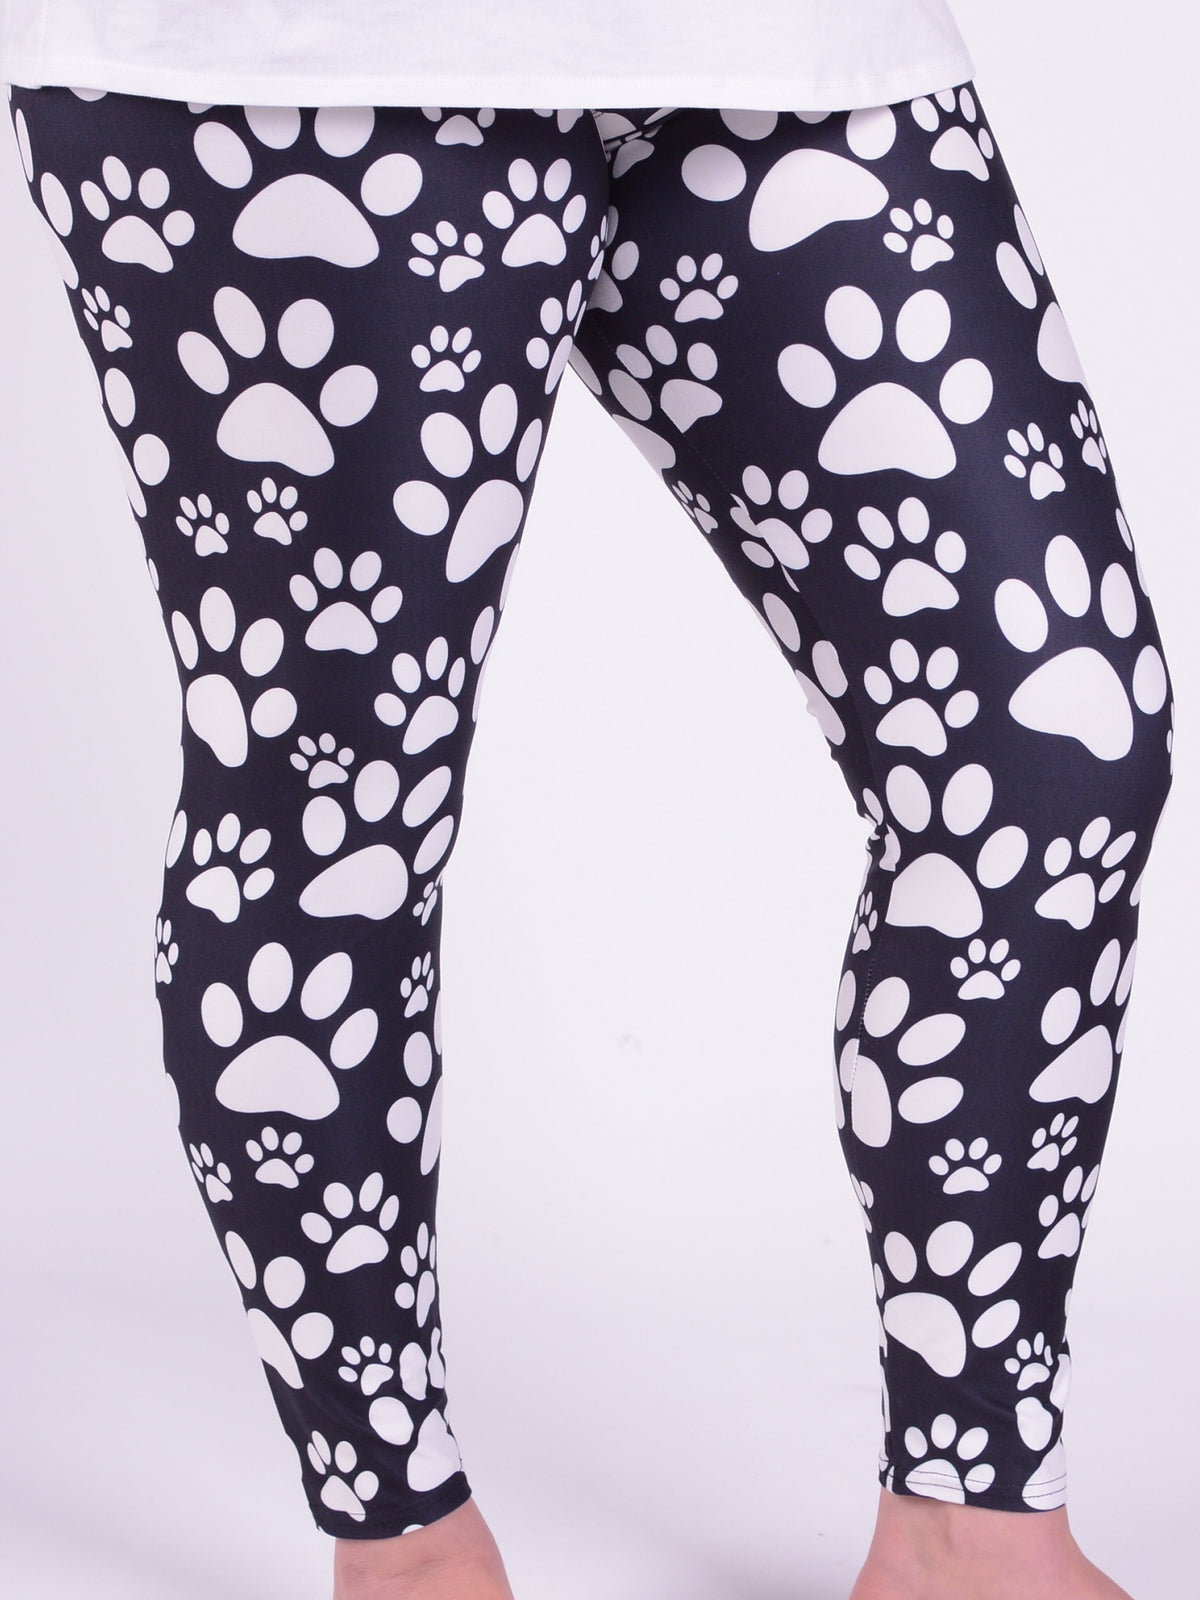 Leggings  - Black and White Paws - L57, Trousers, Pure Plus Clothing, Lagenlook Clothing, Plus Size Fashion, Over 50 Fashion